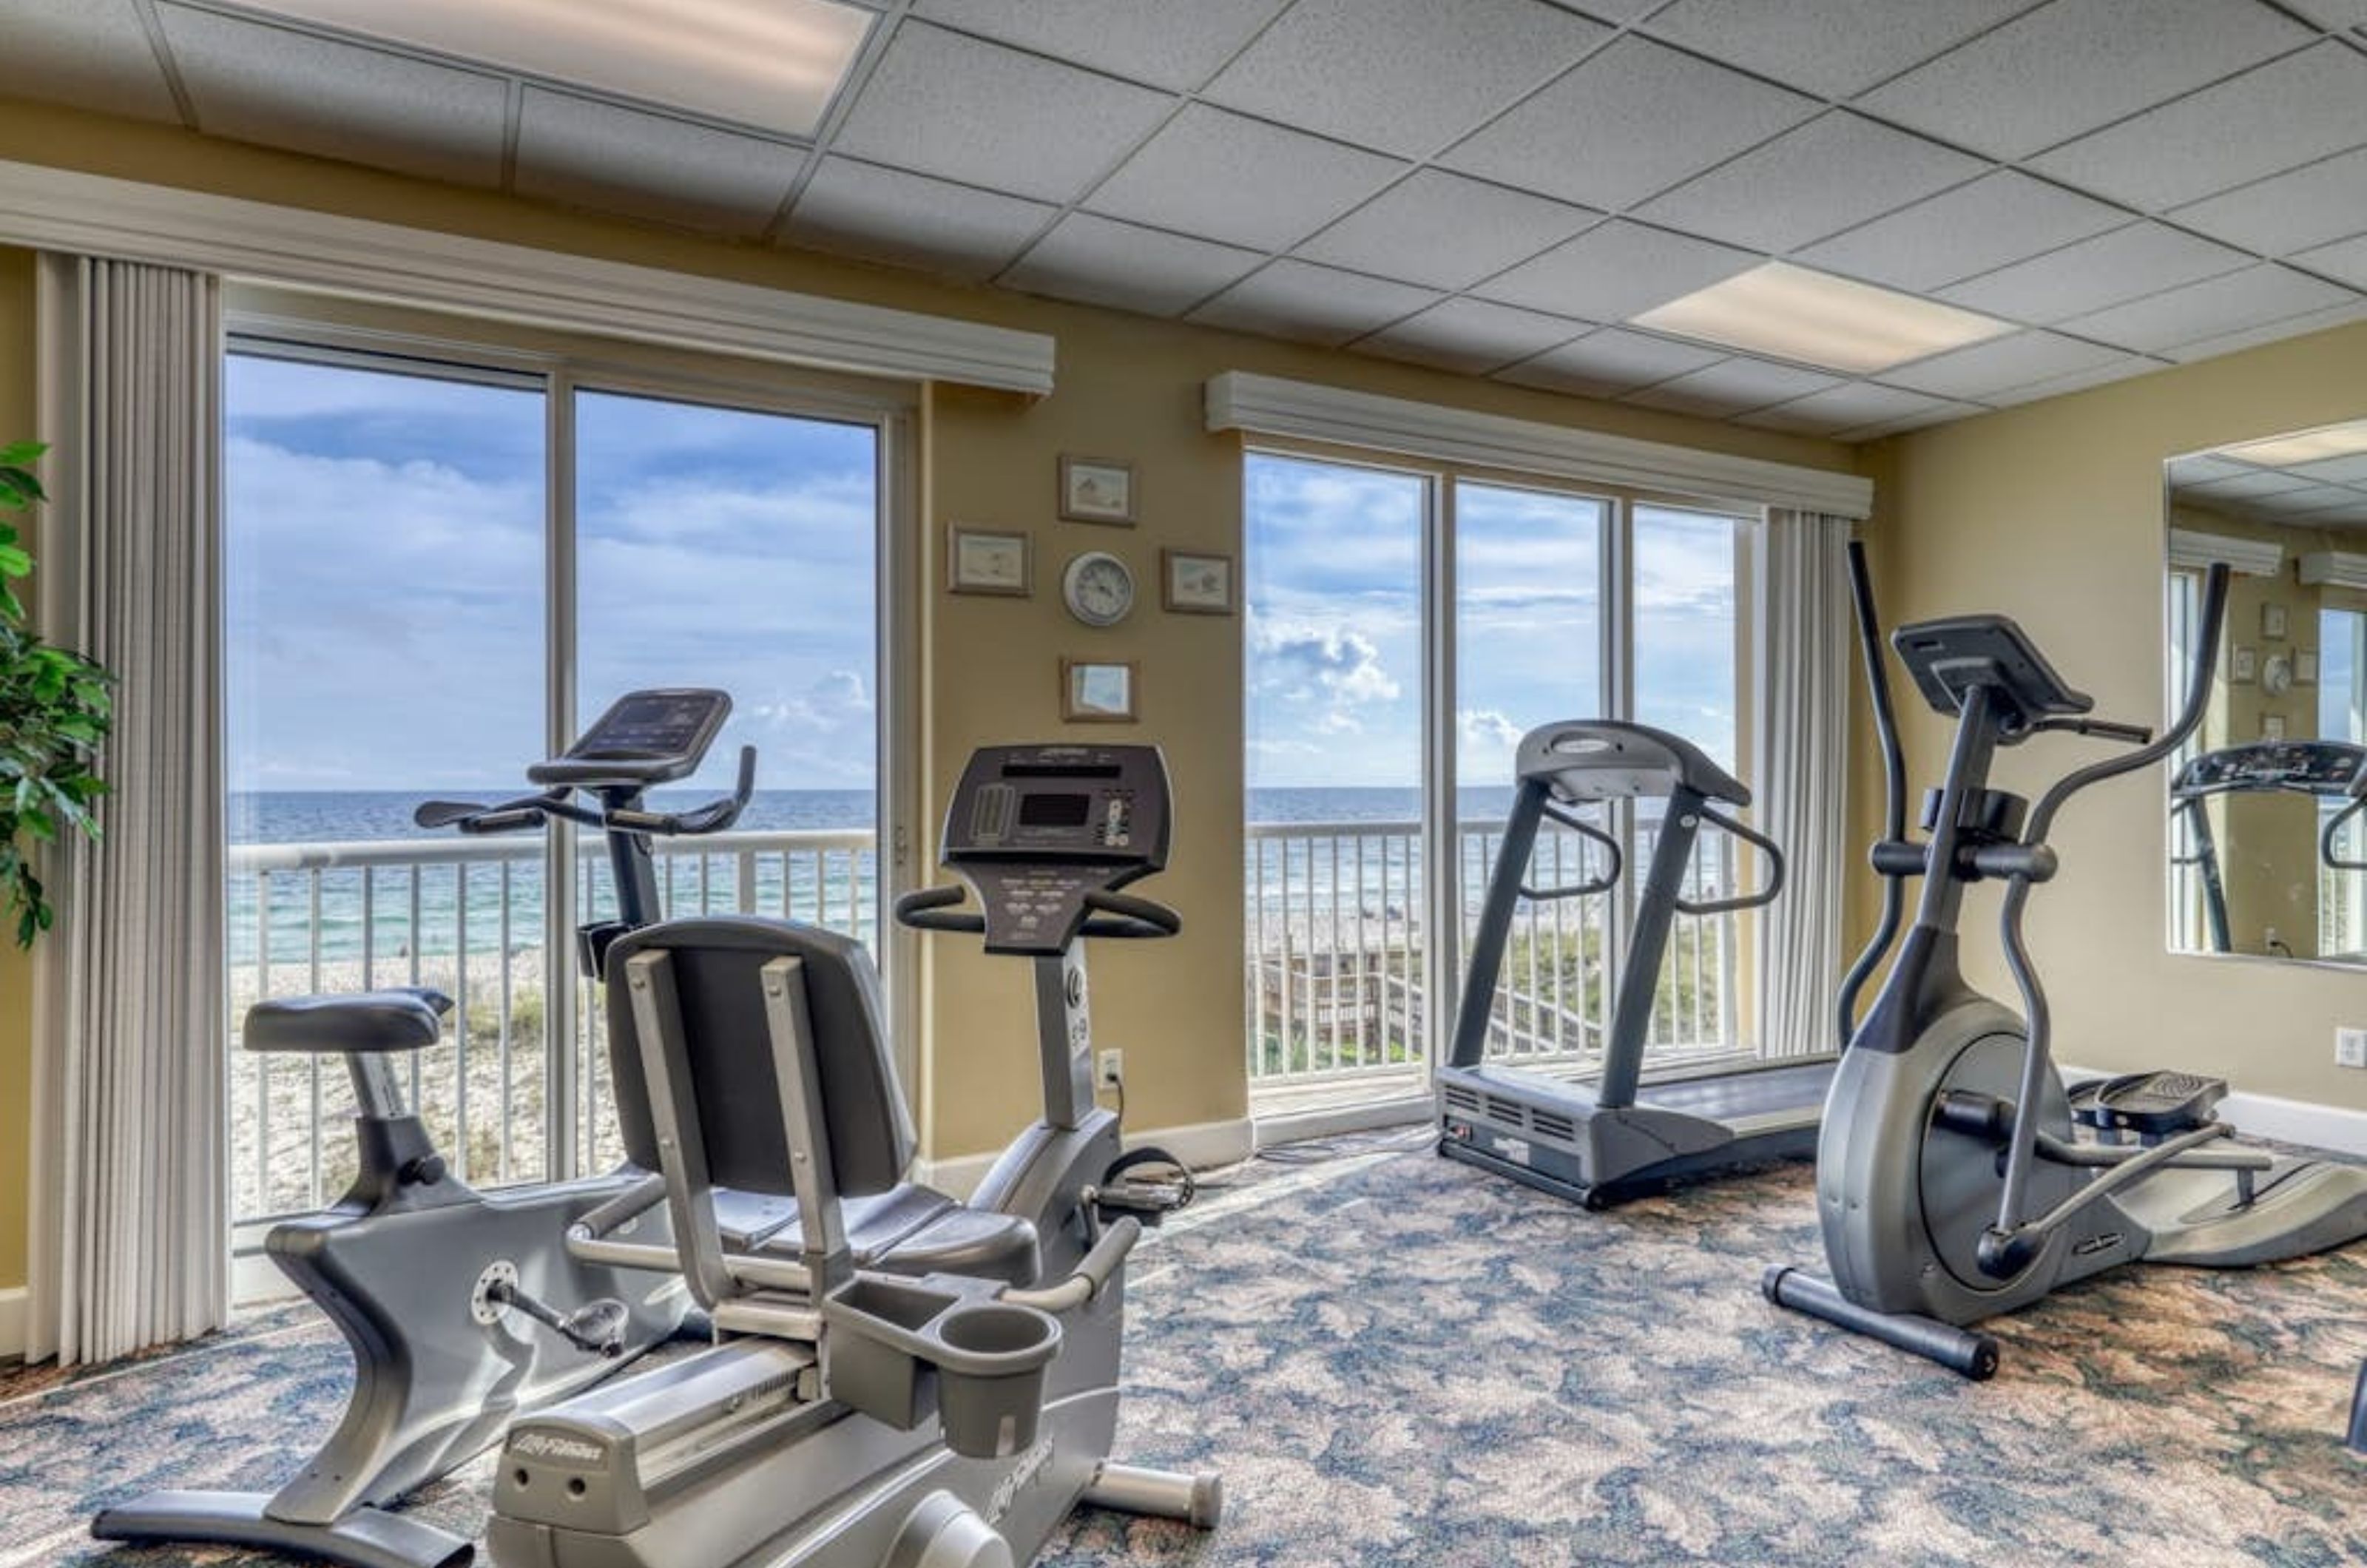 Cardio equipment in the gym at Island Royale next to Gulf-facing windows